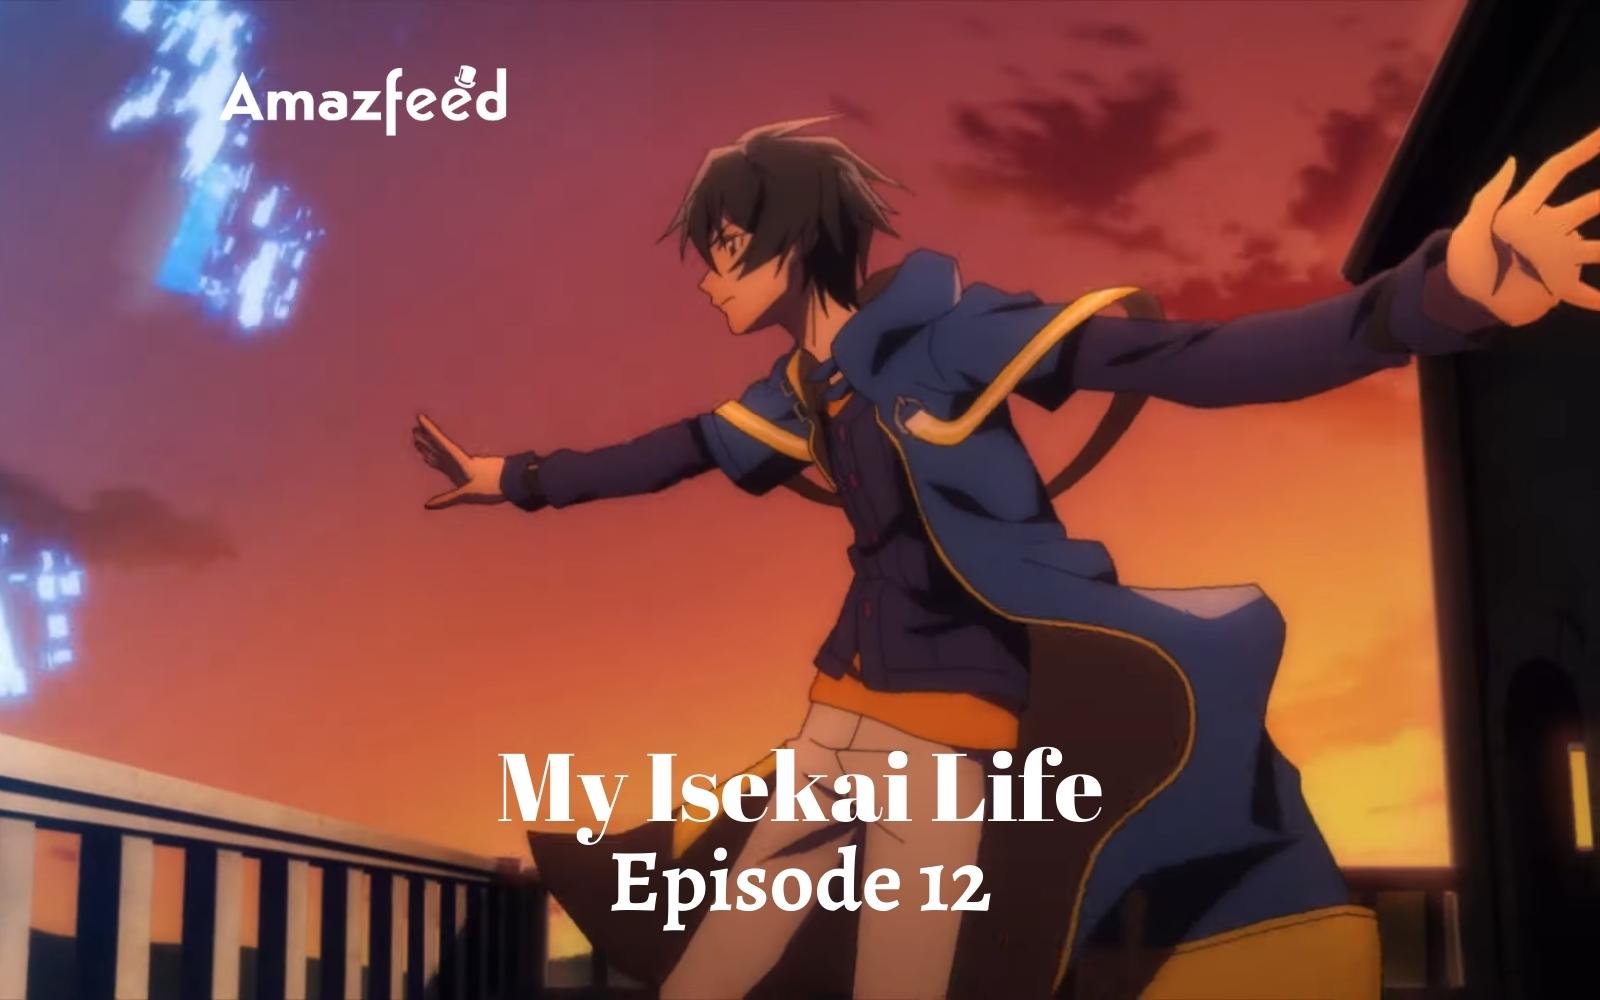 My Isekai Life Episode 12 : Countdown, Release Date, Spoiler, Premiere Time, Where to Watch, Recap & Cast